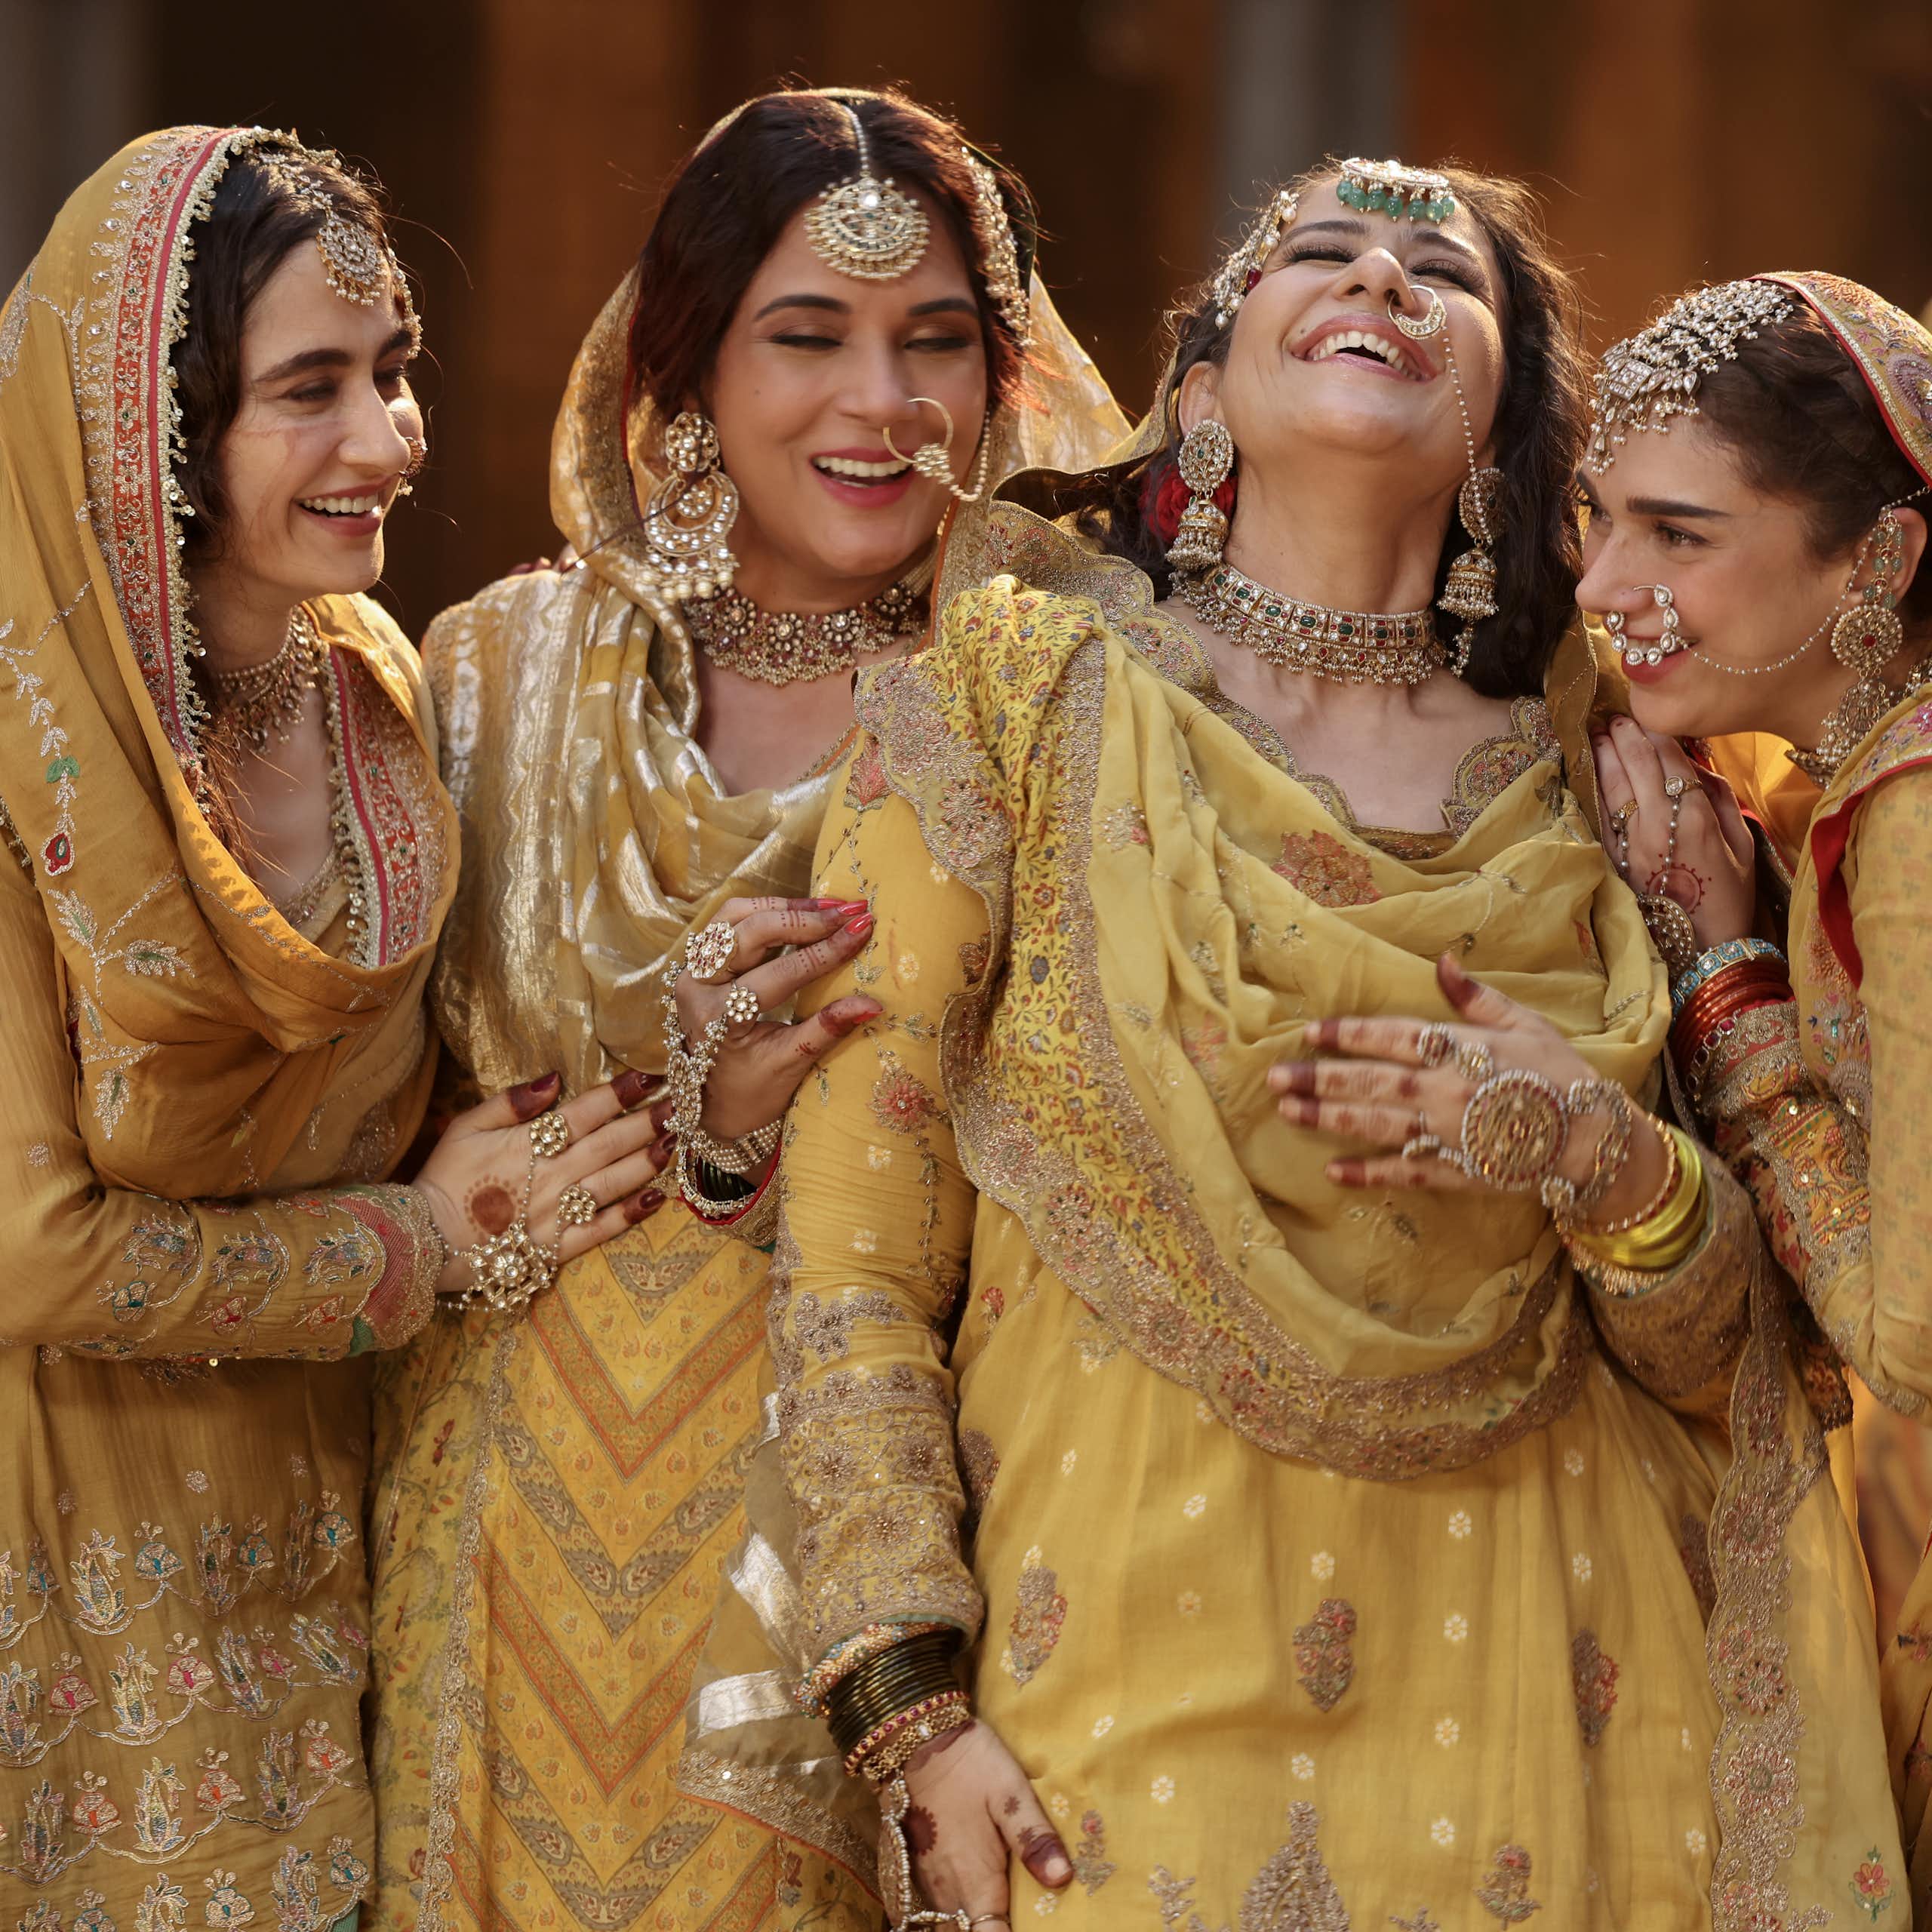 Indian women dressed in gold